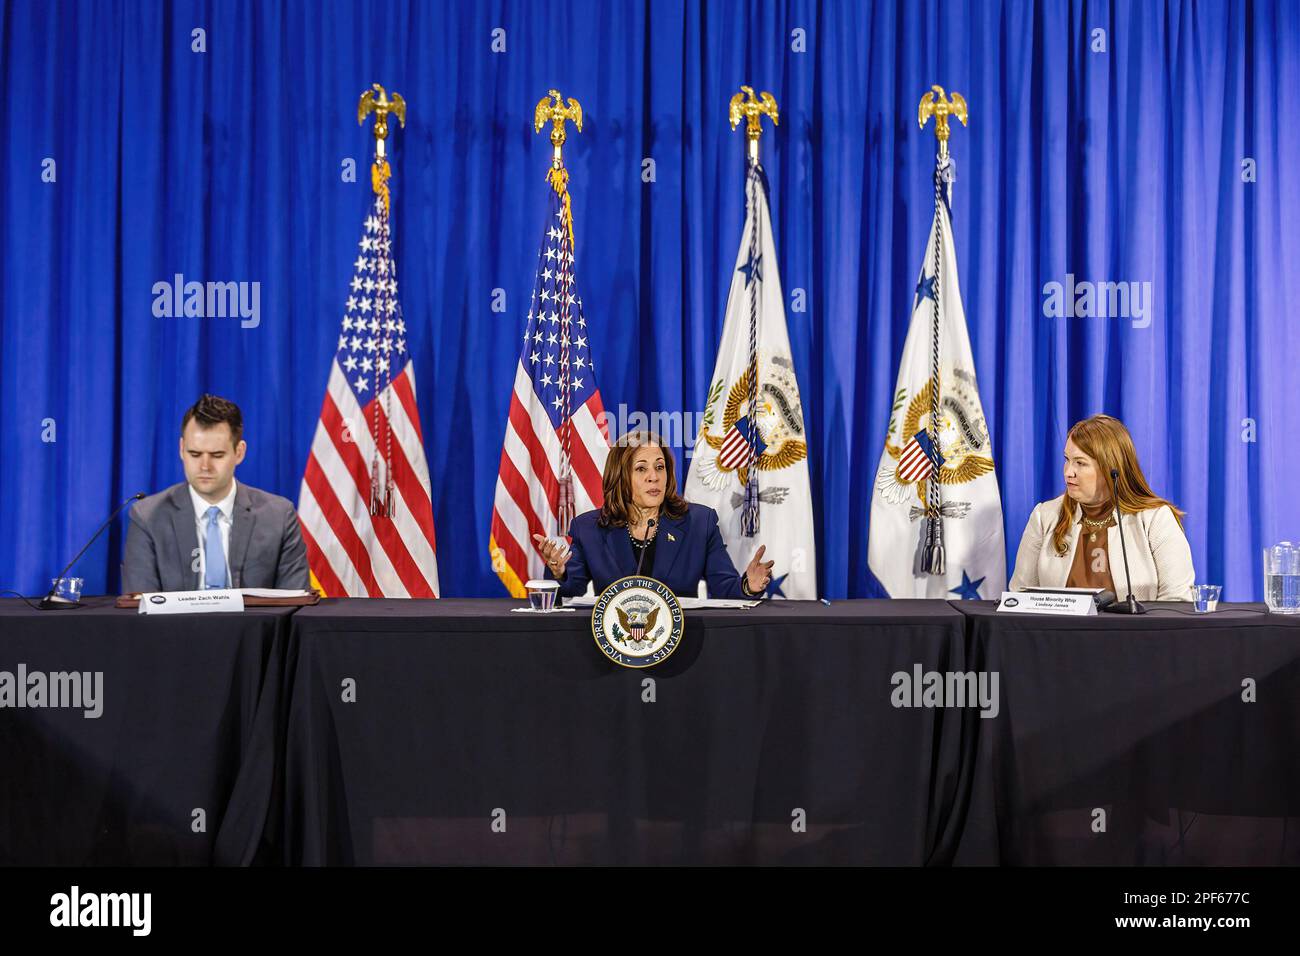 Des Moines, United States. 16th Mar, 2023. State Senator Zach Wahls (D-Coralville, left) and State Representative Lindsay James (D-Dubuque, right) listen as Vice President Kamala Harris (center) speaking. Vice President Kamala Harris held a press conference prior to a roundtable discussion on reproductive rights. Credit: SOPA Images Limited/Alamy Live News Stock Photo